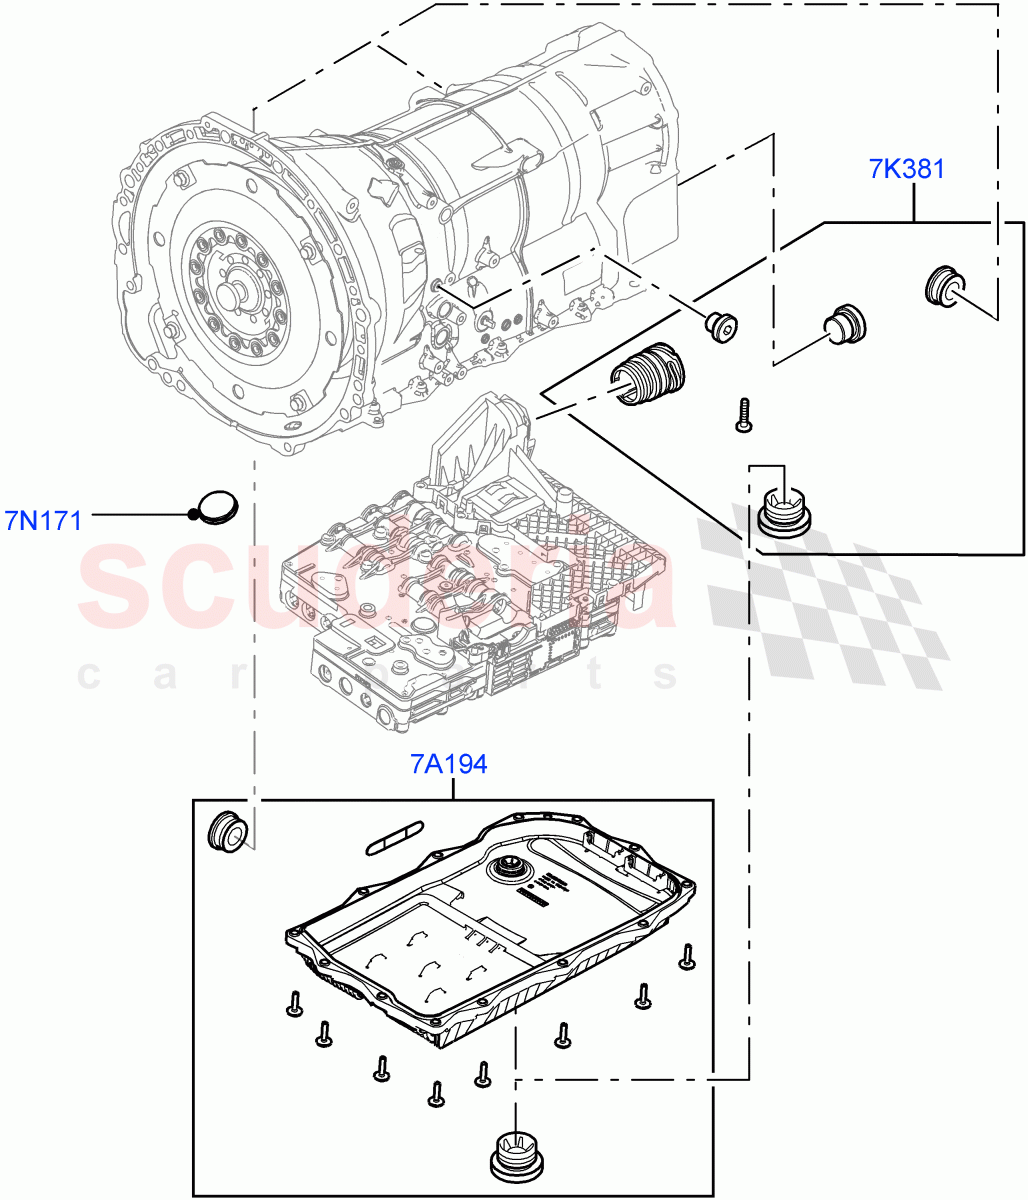 Transmission External Components(Solihull Plant Build)(2.0L I4 DSL HIGH DOHC AJ200,8 Speed Auto Trans ZF 8HP70 4WD)((V)FROMHA000001) of Land Rover Land Rover Discovery 5 (2017+) [3.0 Diesel 24V DOHC TC]